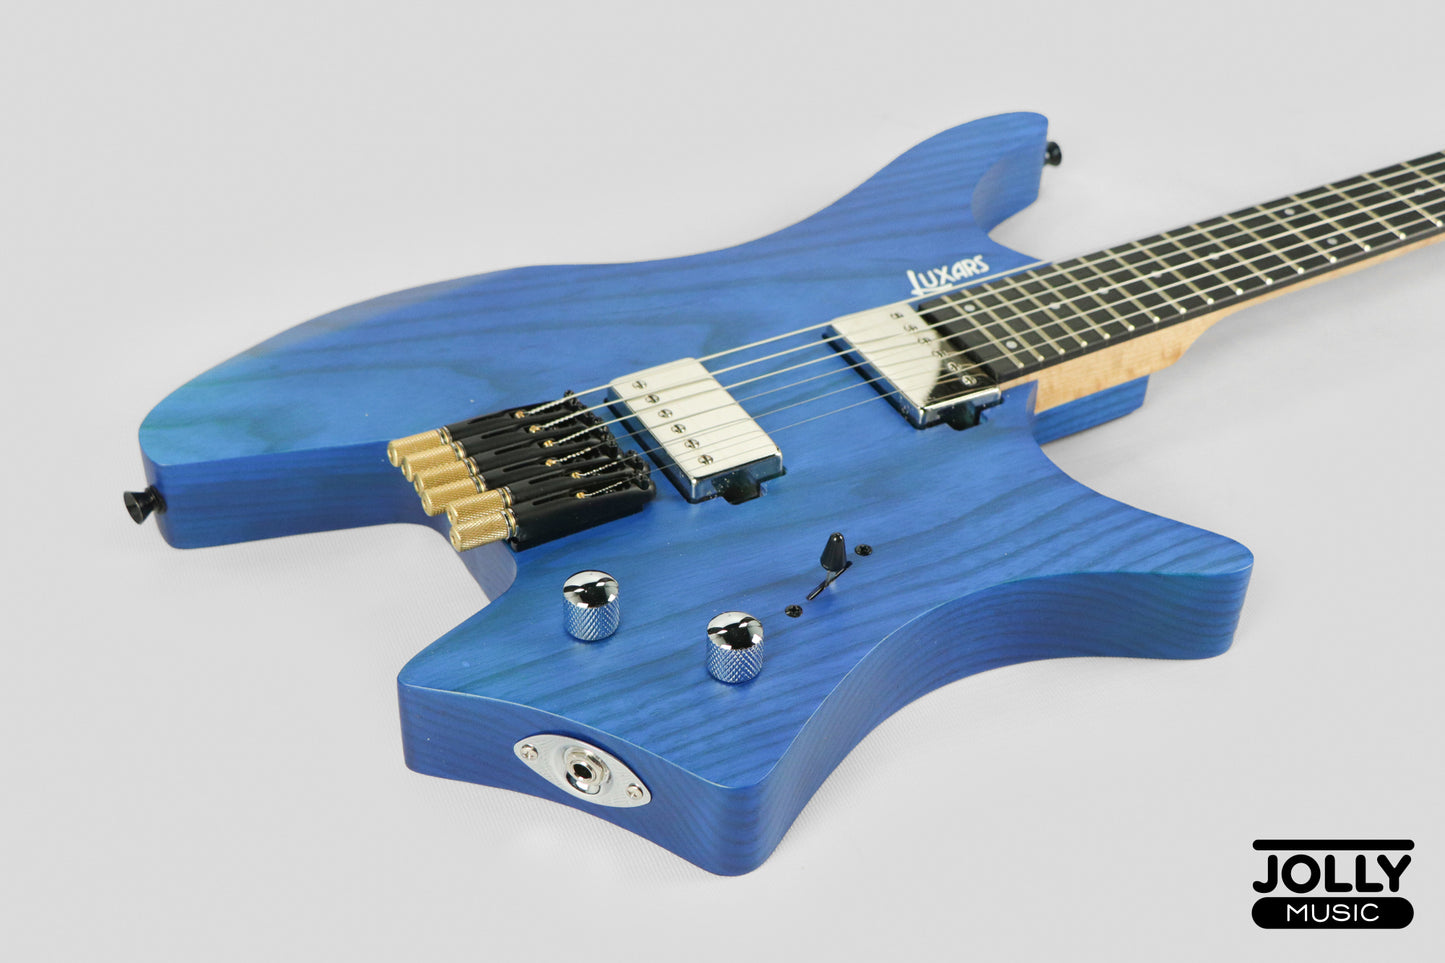 Luxars S-G62 Headless Electric Guitar Basswood Body Rosewood Fretboard - Blue